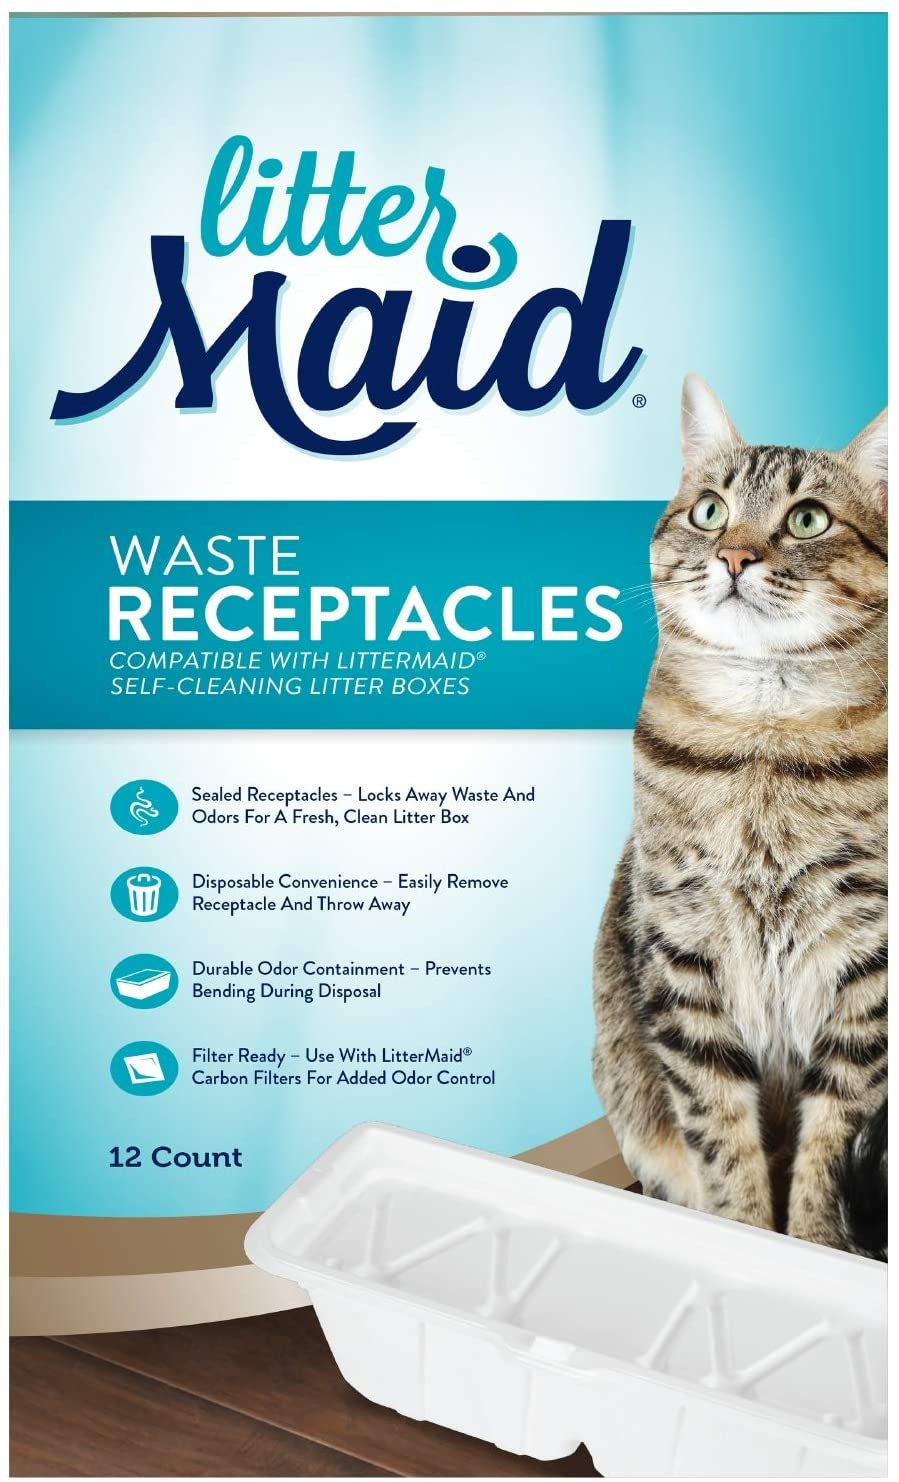 Littermaid Litter Box Waste Receptacles, Disposable/Sealable Waste Receptacles for Automatic Litter Boxes